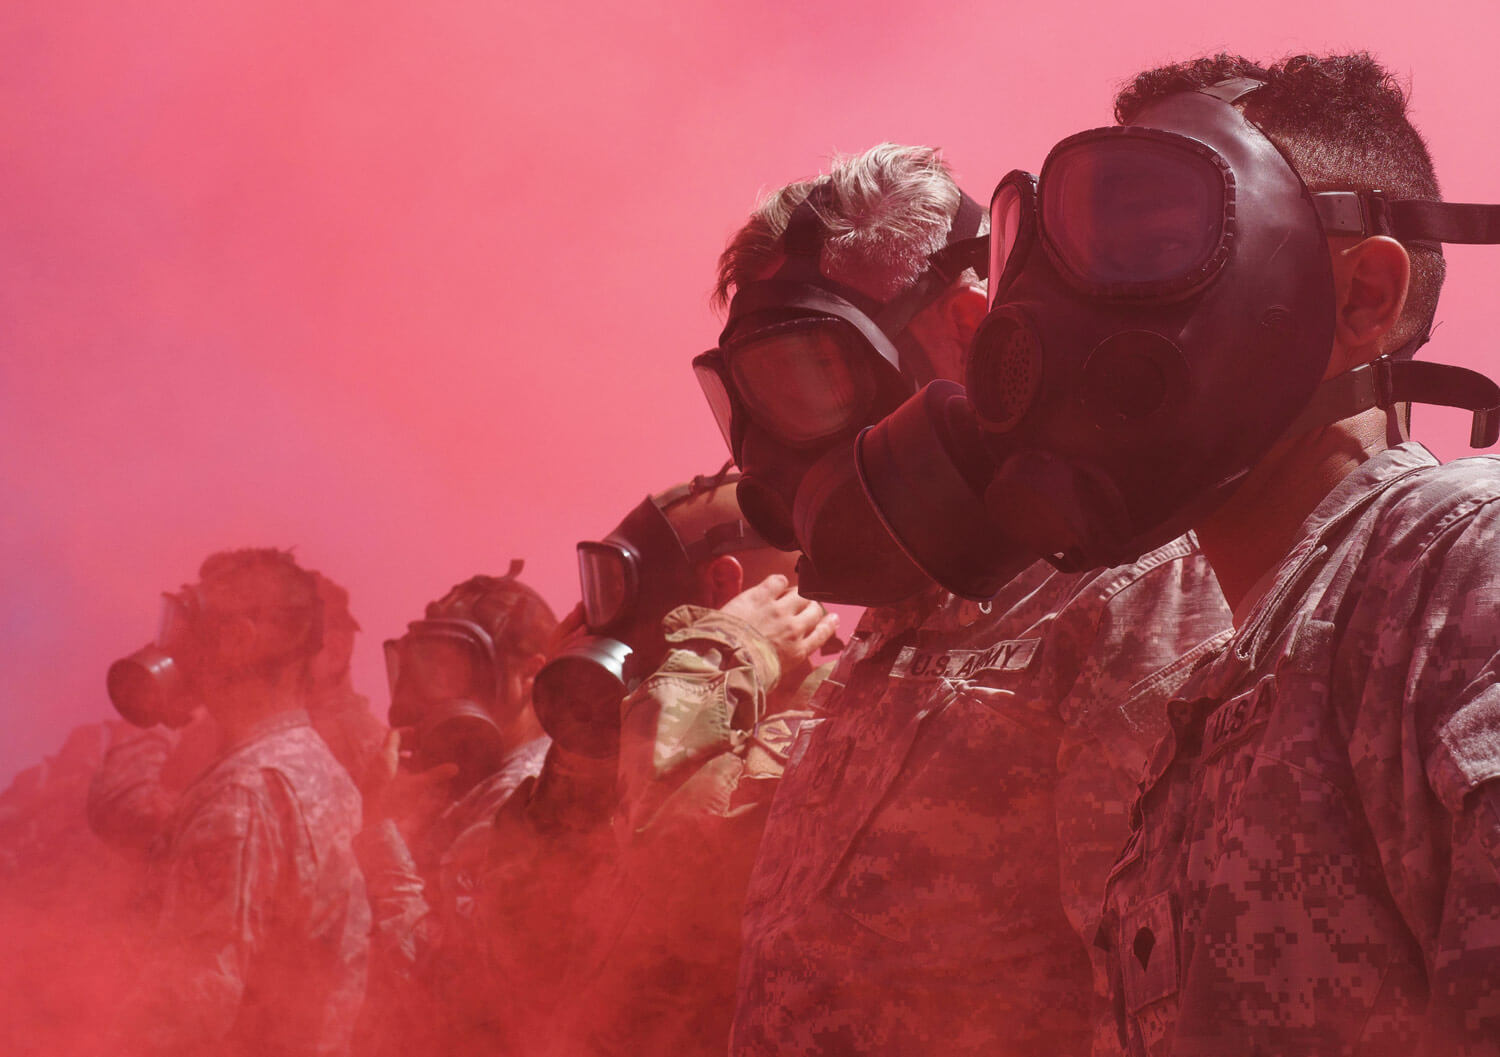 Arizona Army National Guard Soldiers from the 2220th Transportation Company are engulfed by colored smoke after putting on their protective masks during a simulated chemical attack at Florence Military Reservation in Florence, Ariz. Arizona Army National Guard photo by SSG Brian A. Barbour